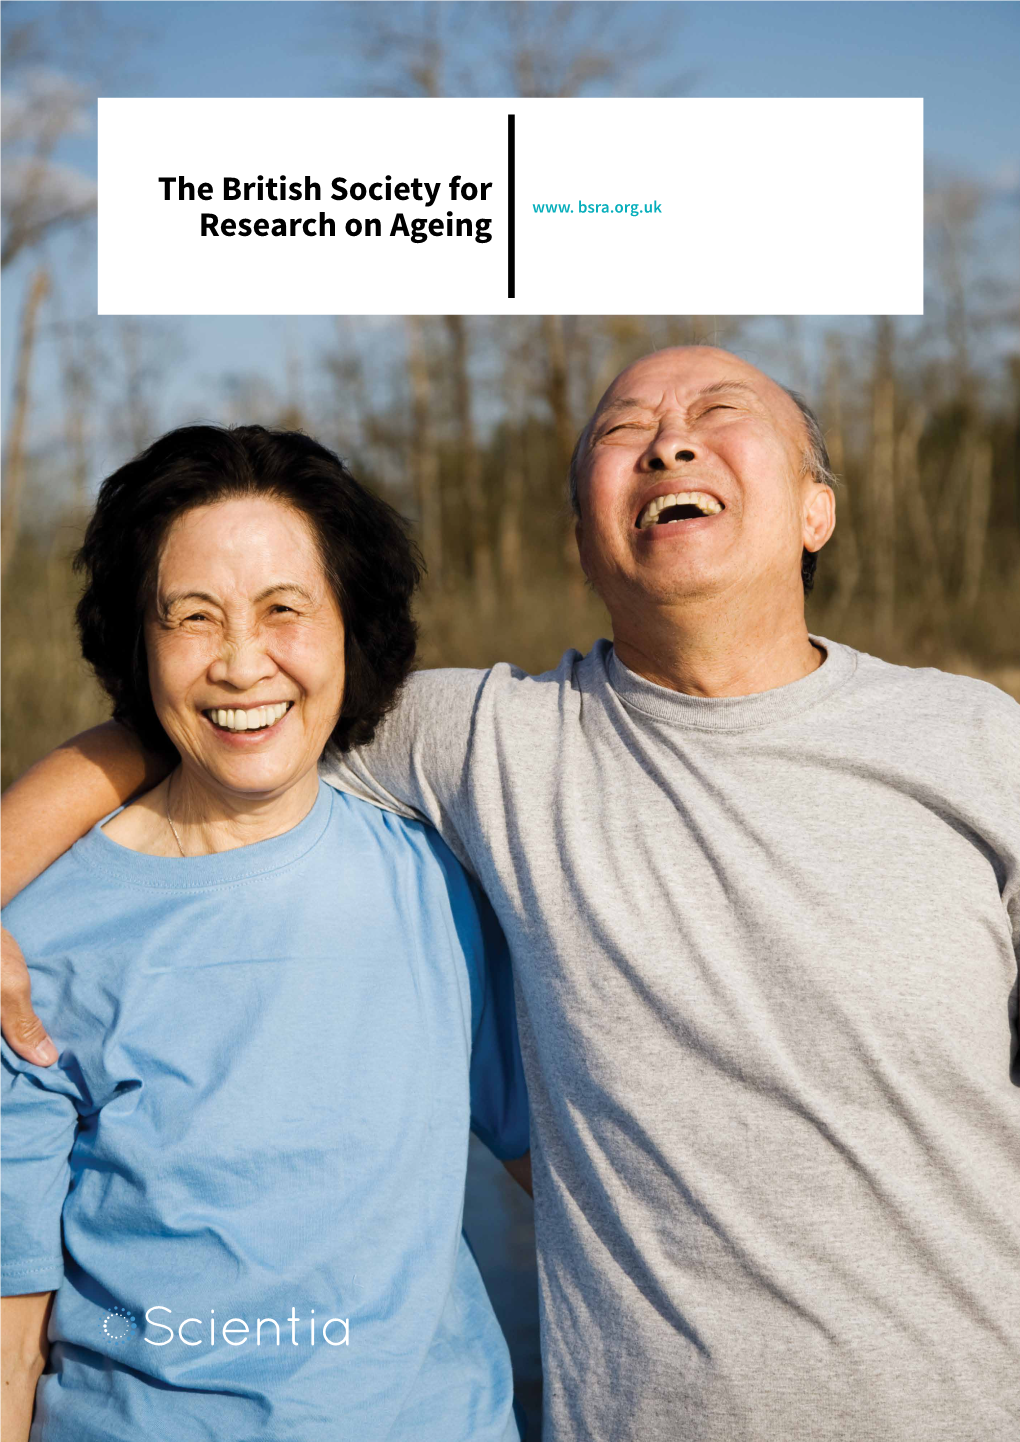 The British Society for Research on Ageing